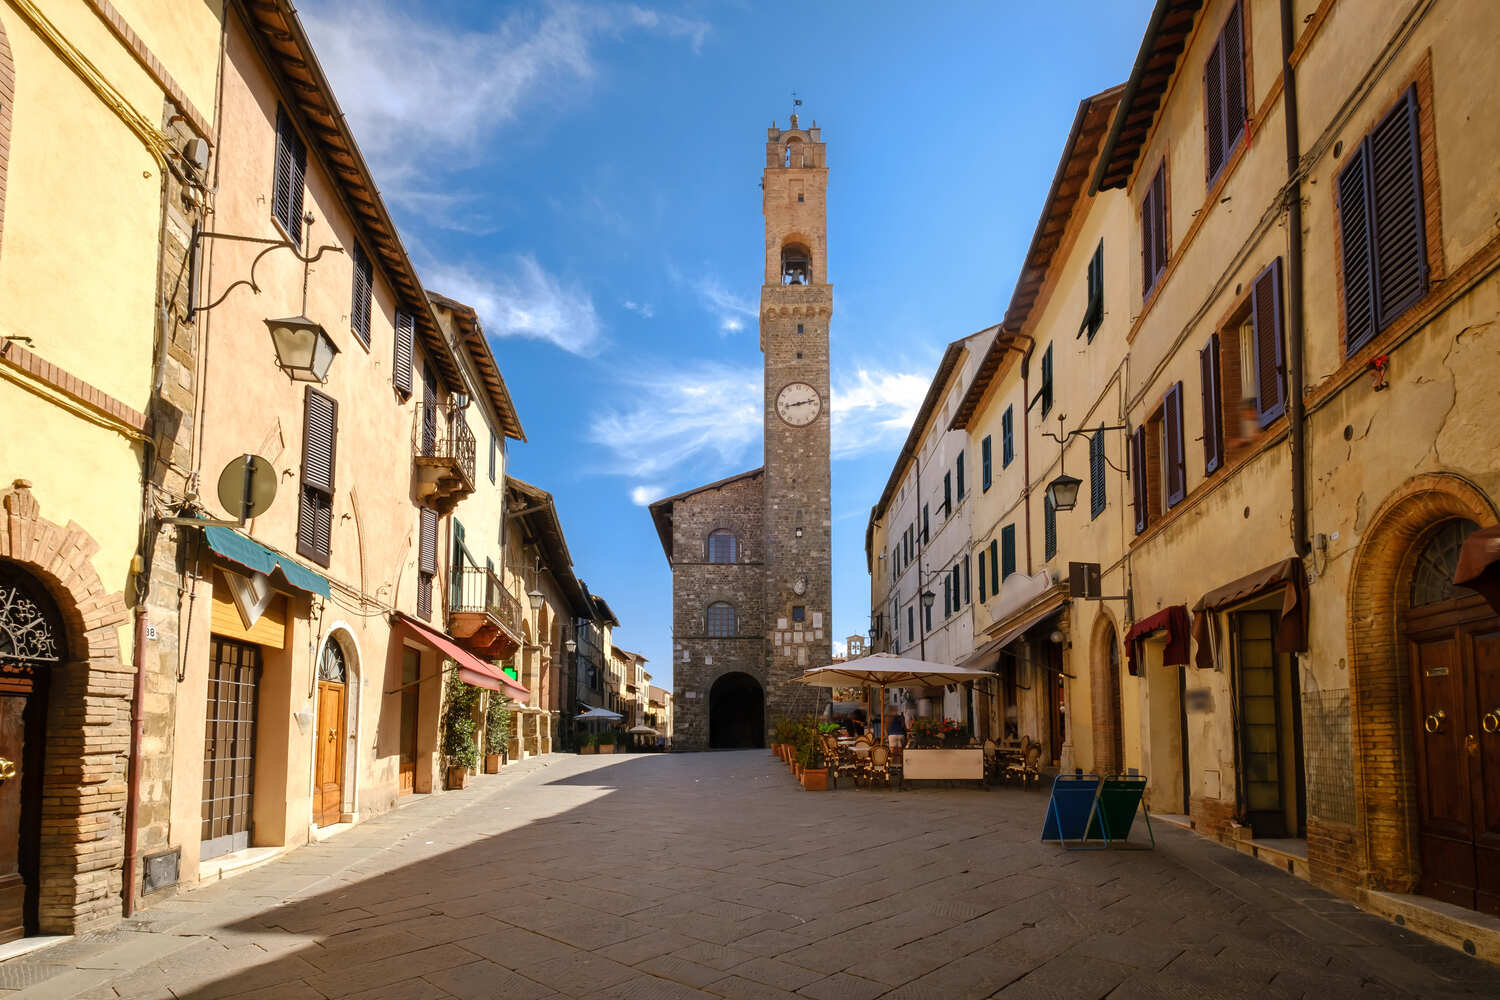 The Tuscan town of Montalcino